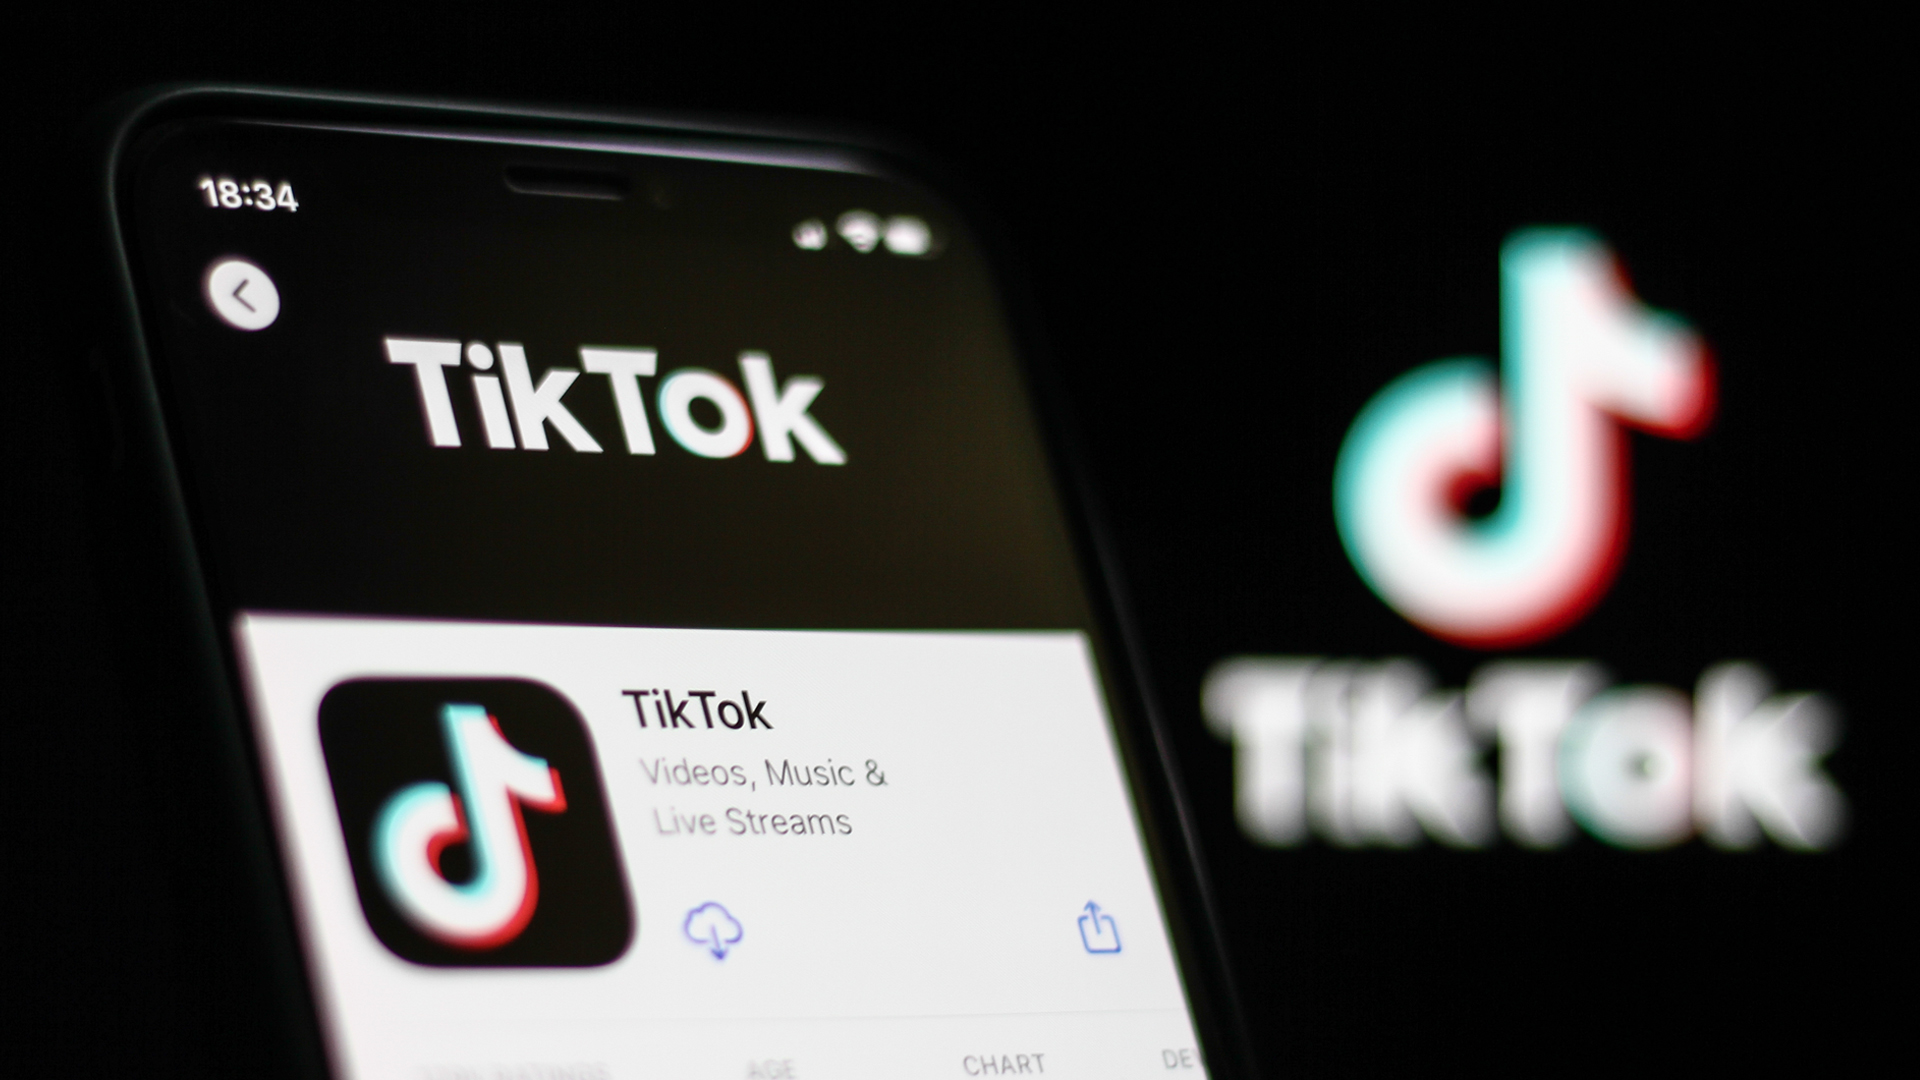 TikTok Live has become 'strip club of 15-year-olds' with 'older men paying them'